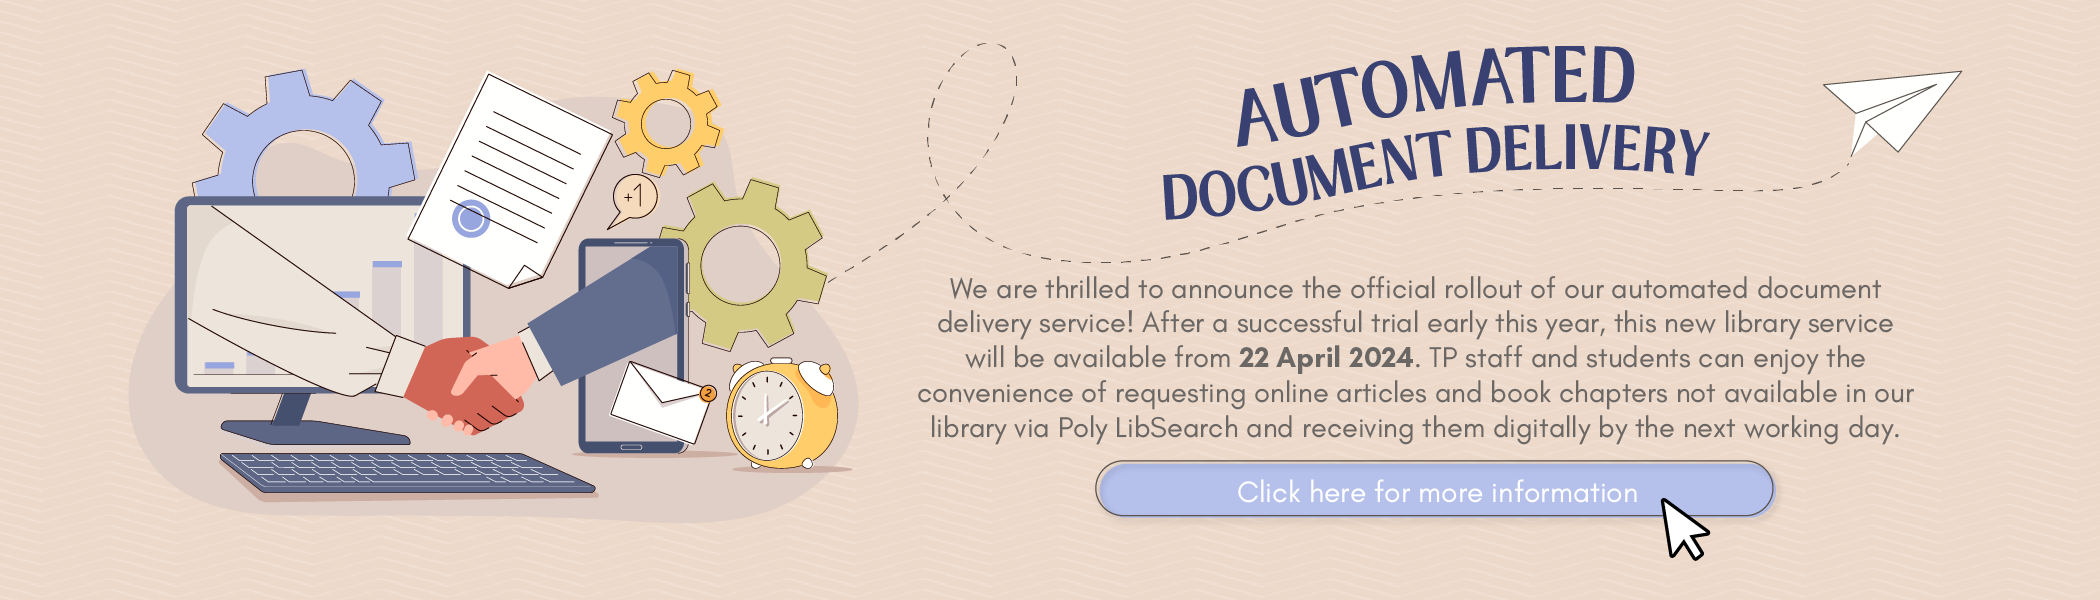 : From 2 Jan to 16 Feb 2024, we are piloting the trial of automated document delivery service for staff and students.